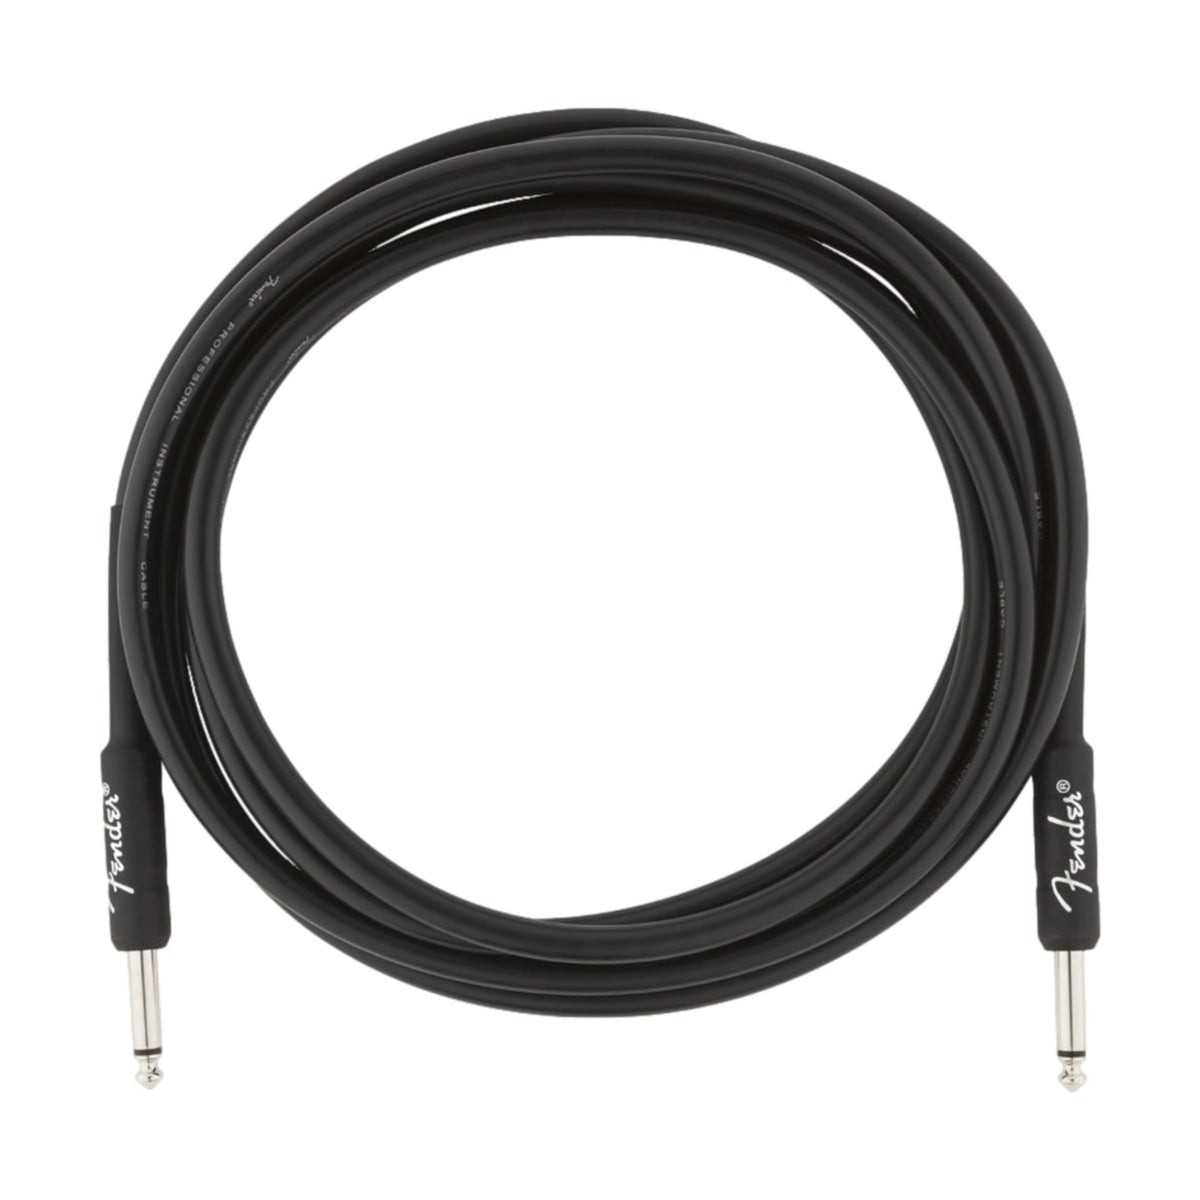 Fender Professional Series Instrument Cable 3m Black Straight